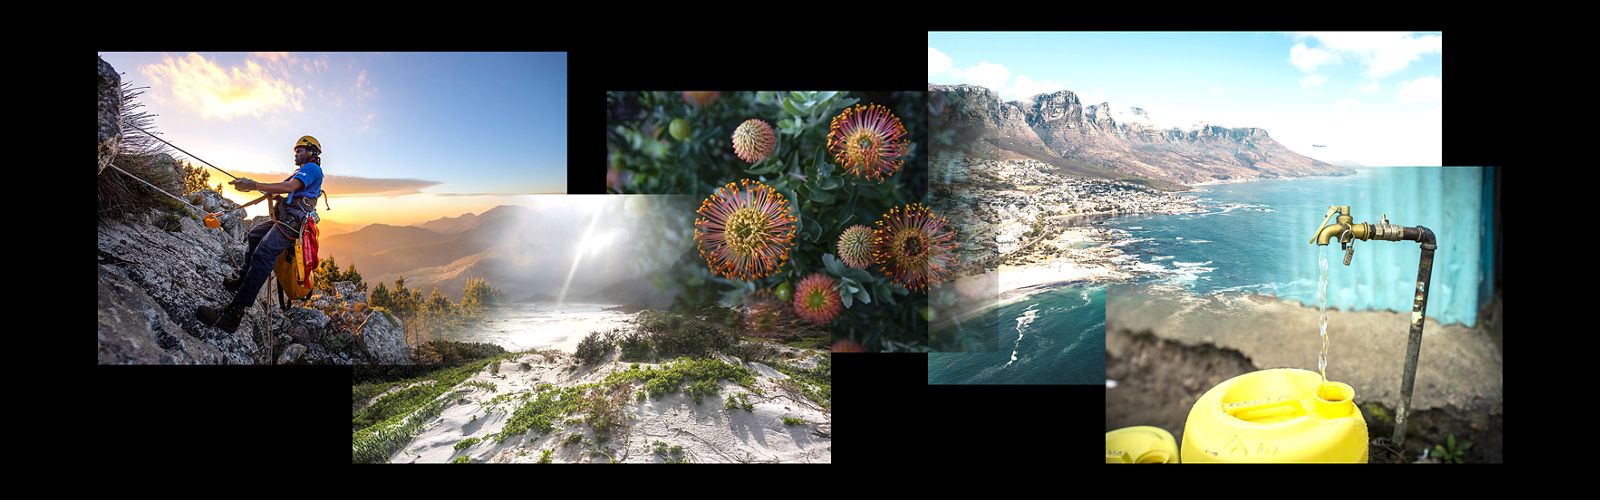 a collage of photos showing scenes from Cape Town, South Africa, including a worker scaling a mountain, landscape scenes, and a water spigot, against a black background